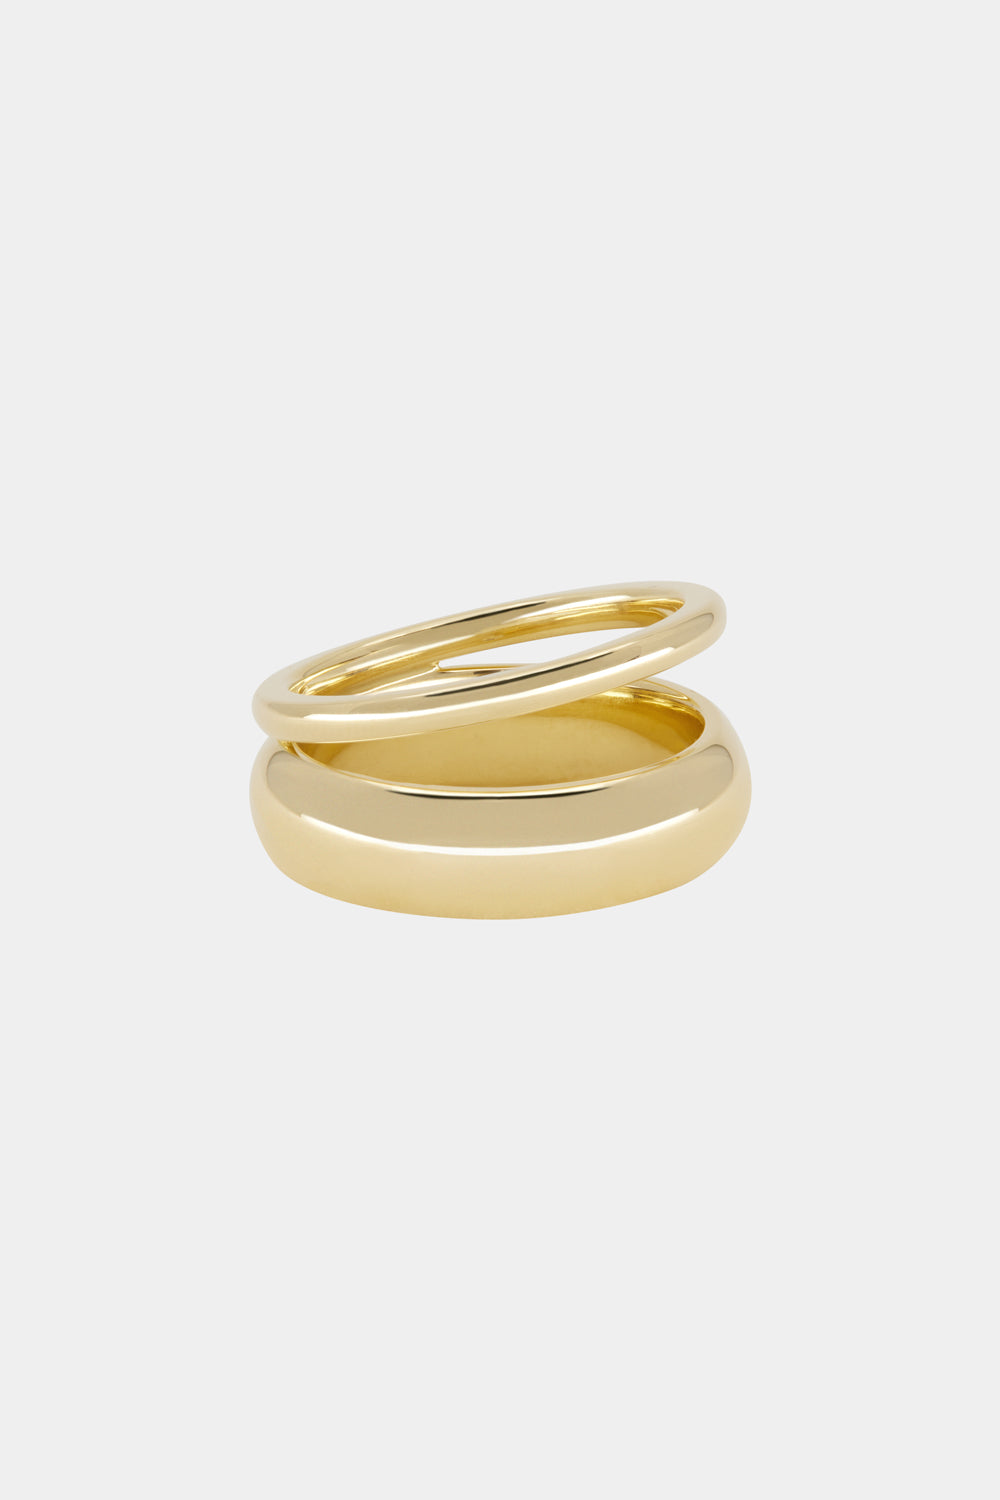 Double Band Vivienne Ring | 9K Yellow Gold, Diamond Option Available